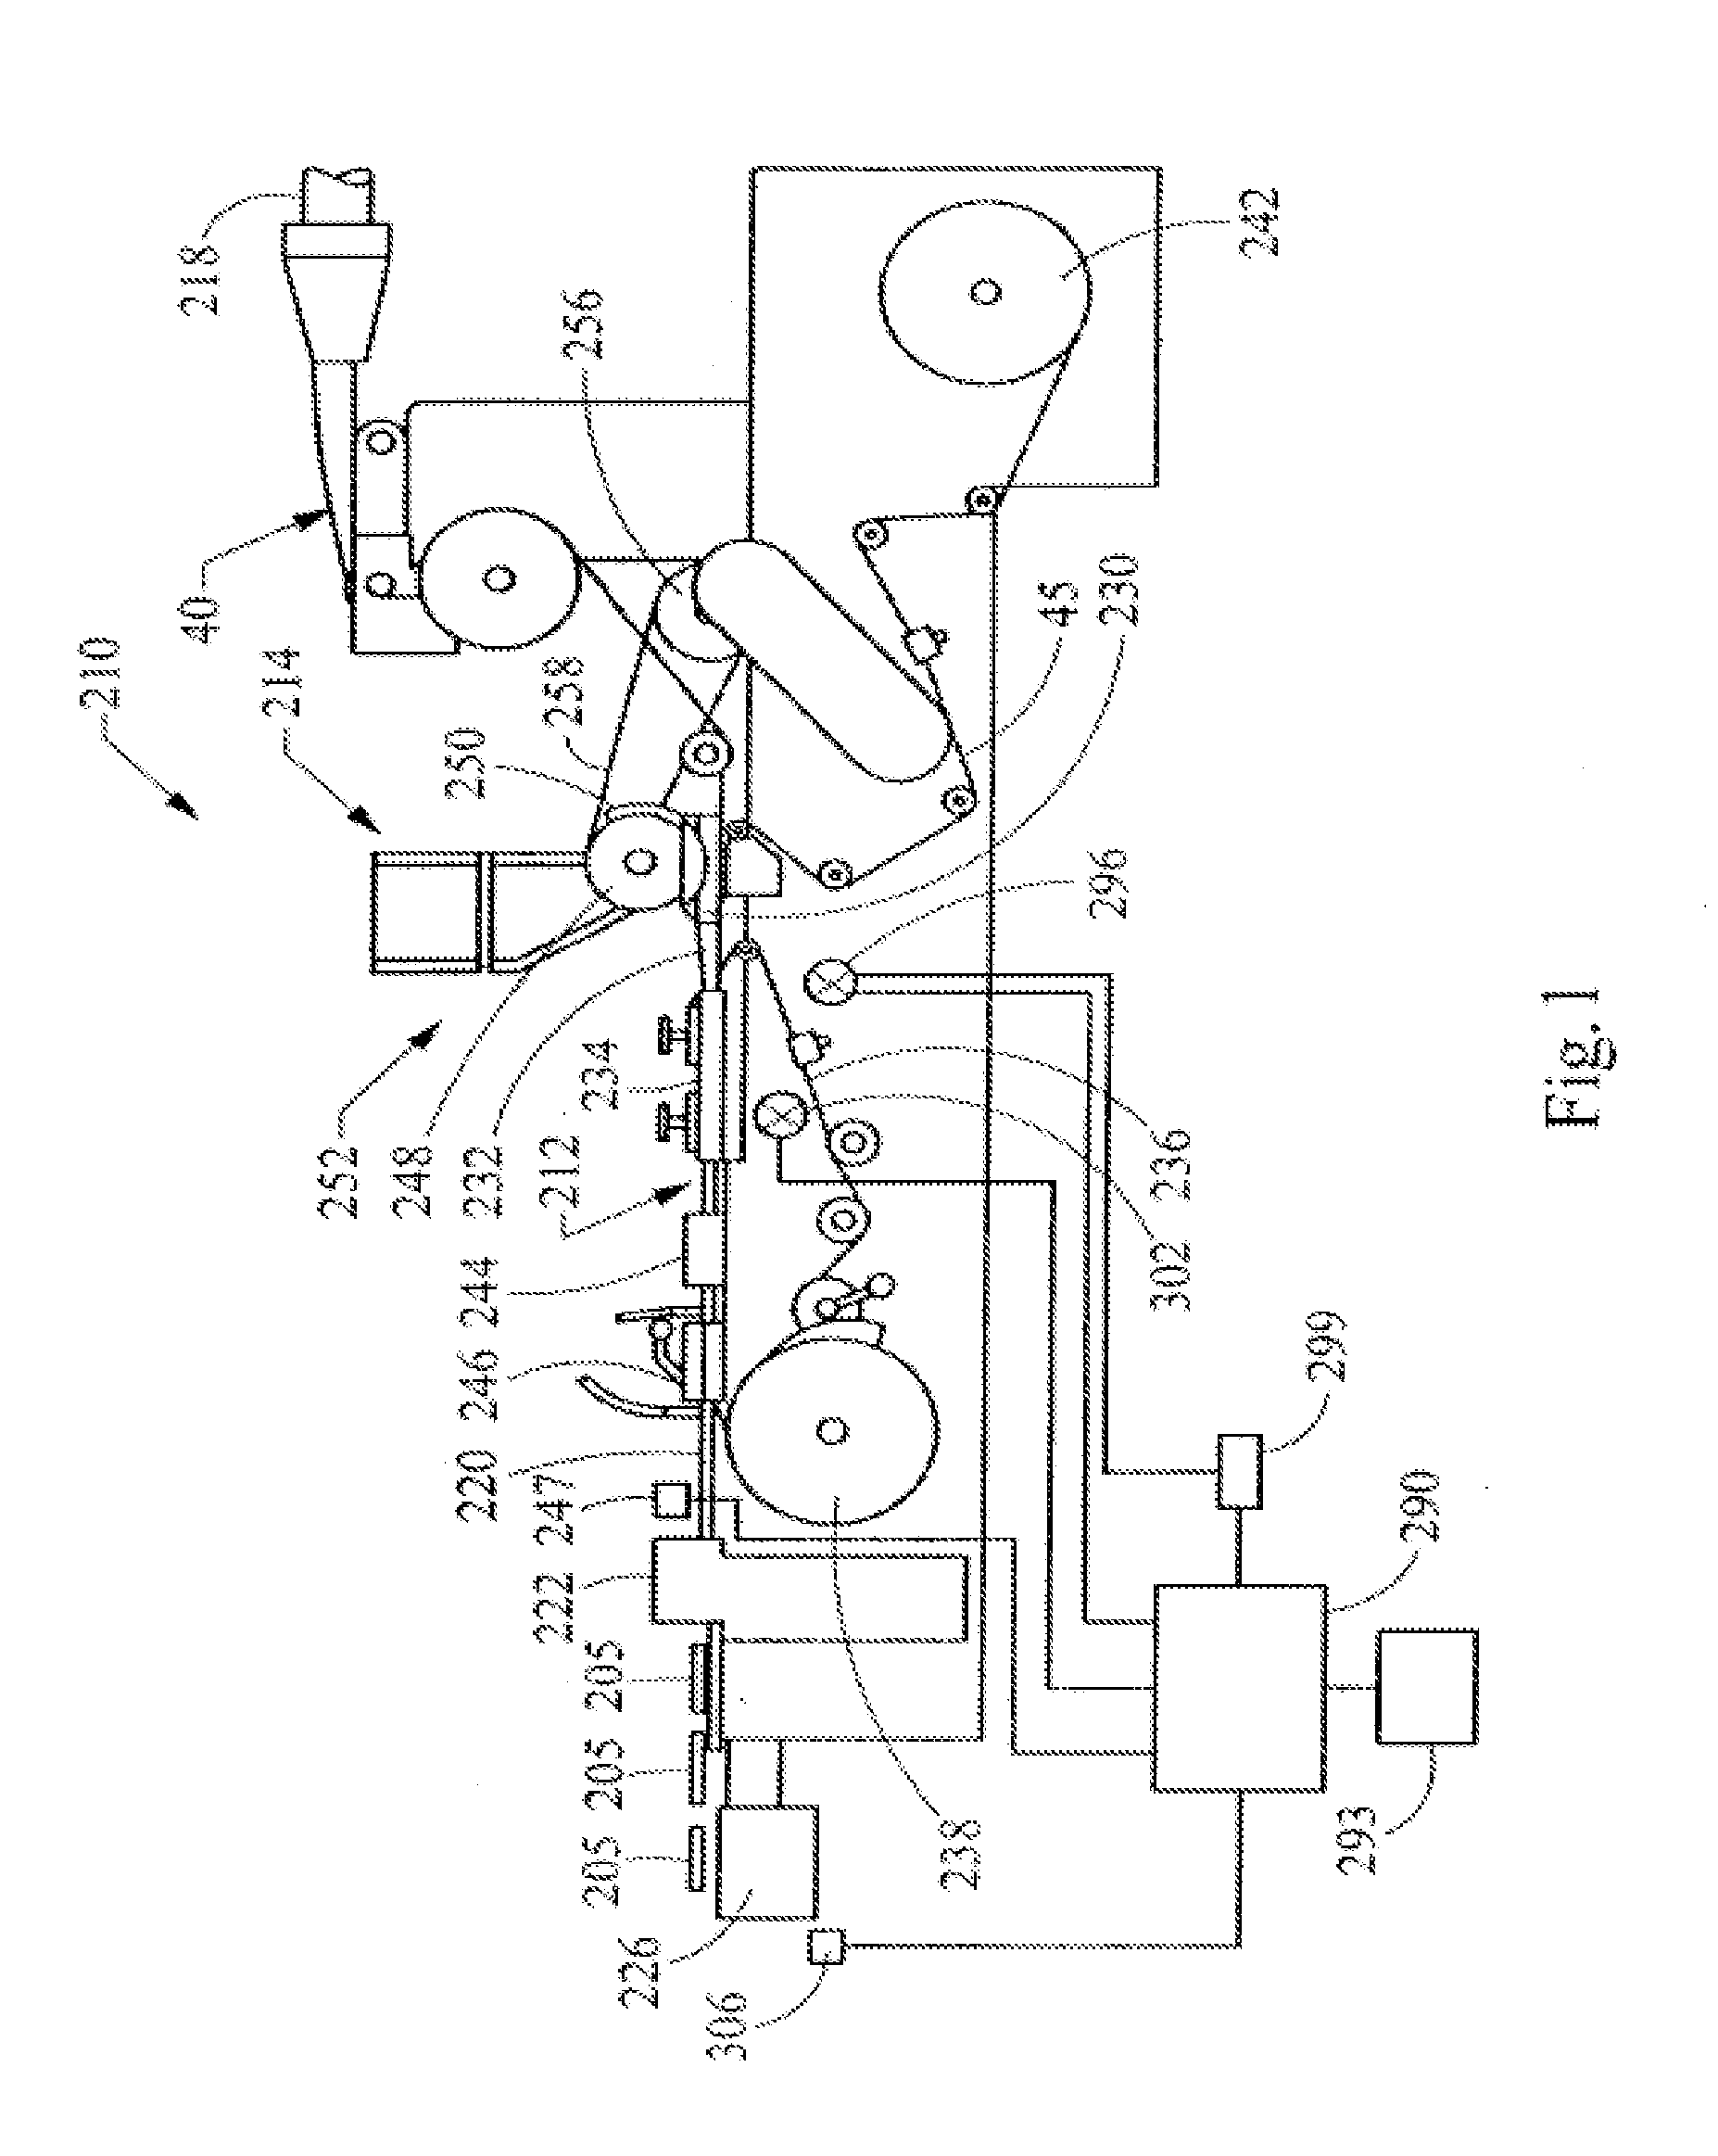 Apparatus for Inserting Objects into a Filter Component of a Smoking Article, and Associated Method